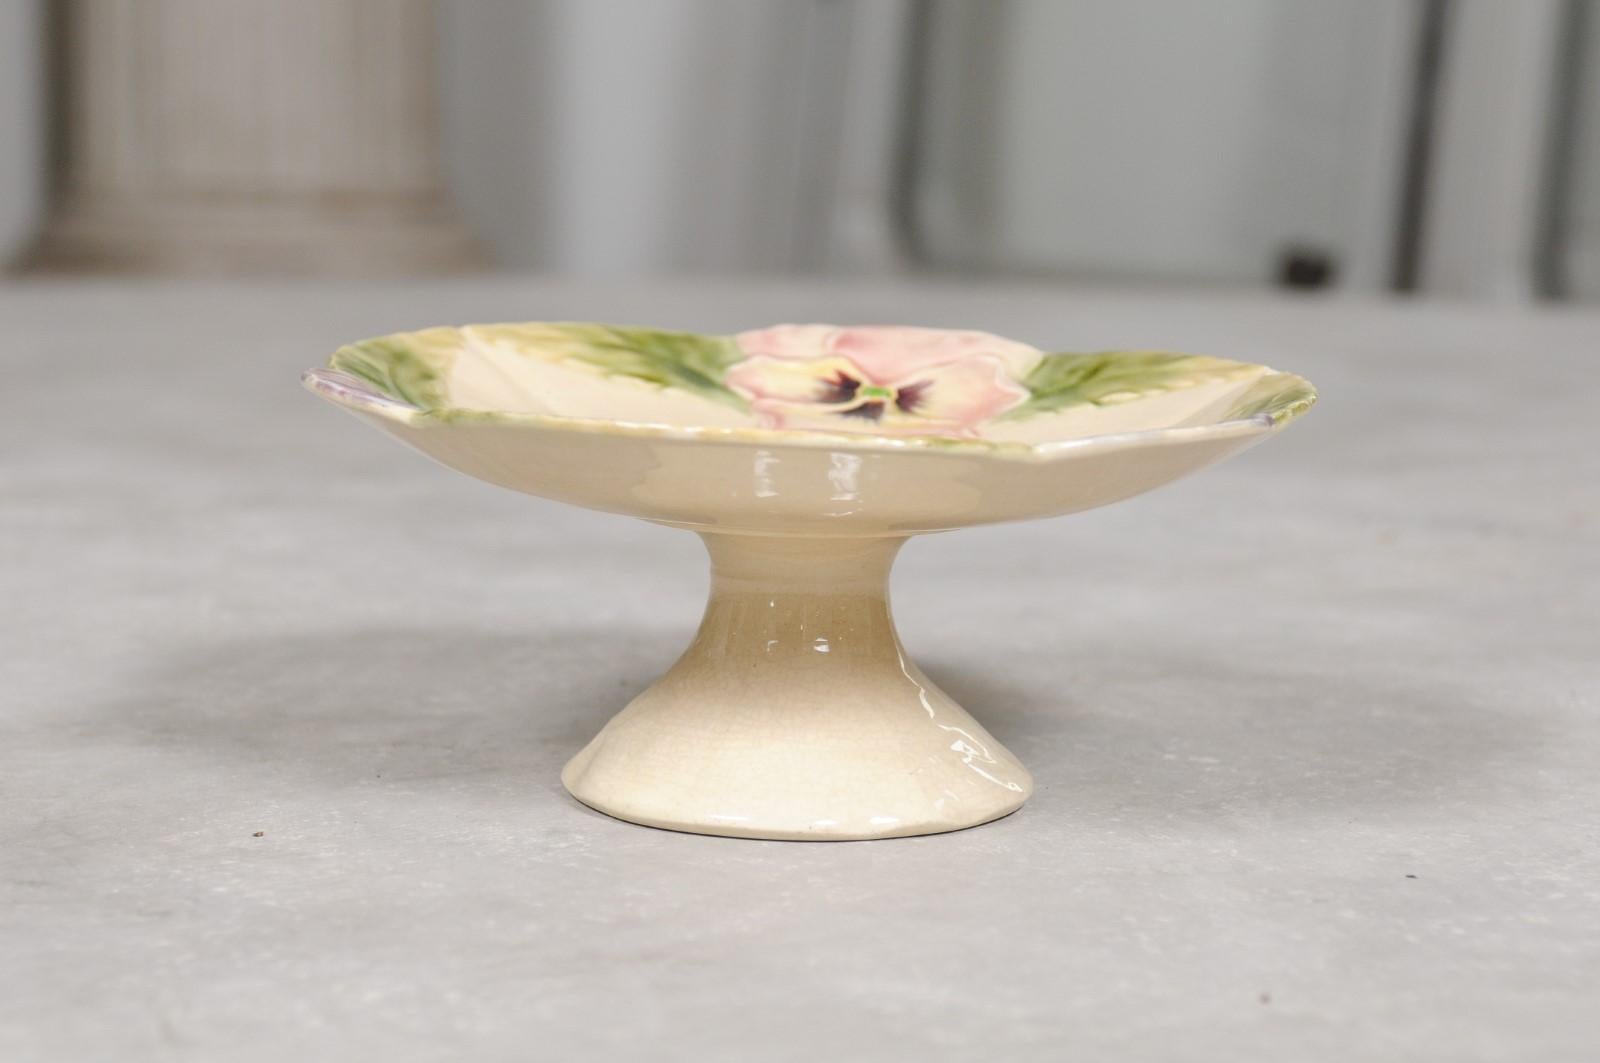 French Majolica Compote with Pansies and Scalloped Edge from the 19th Century For Sale 7